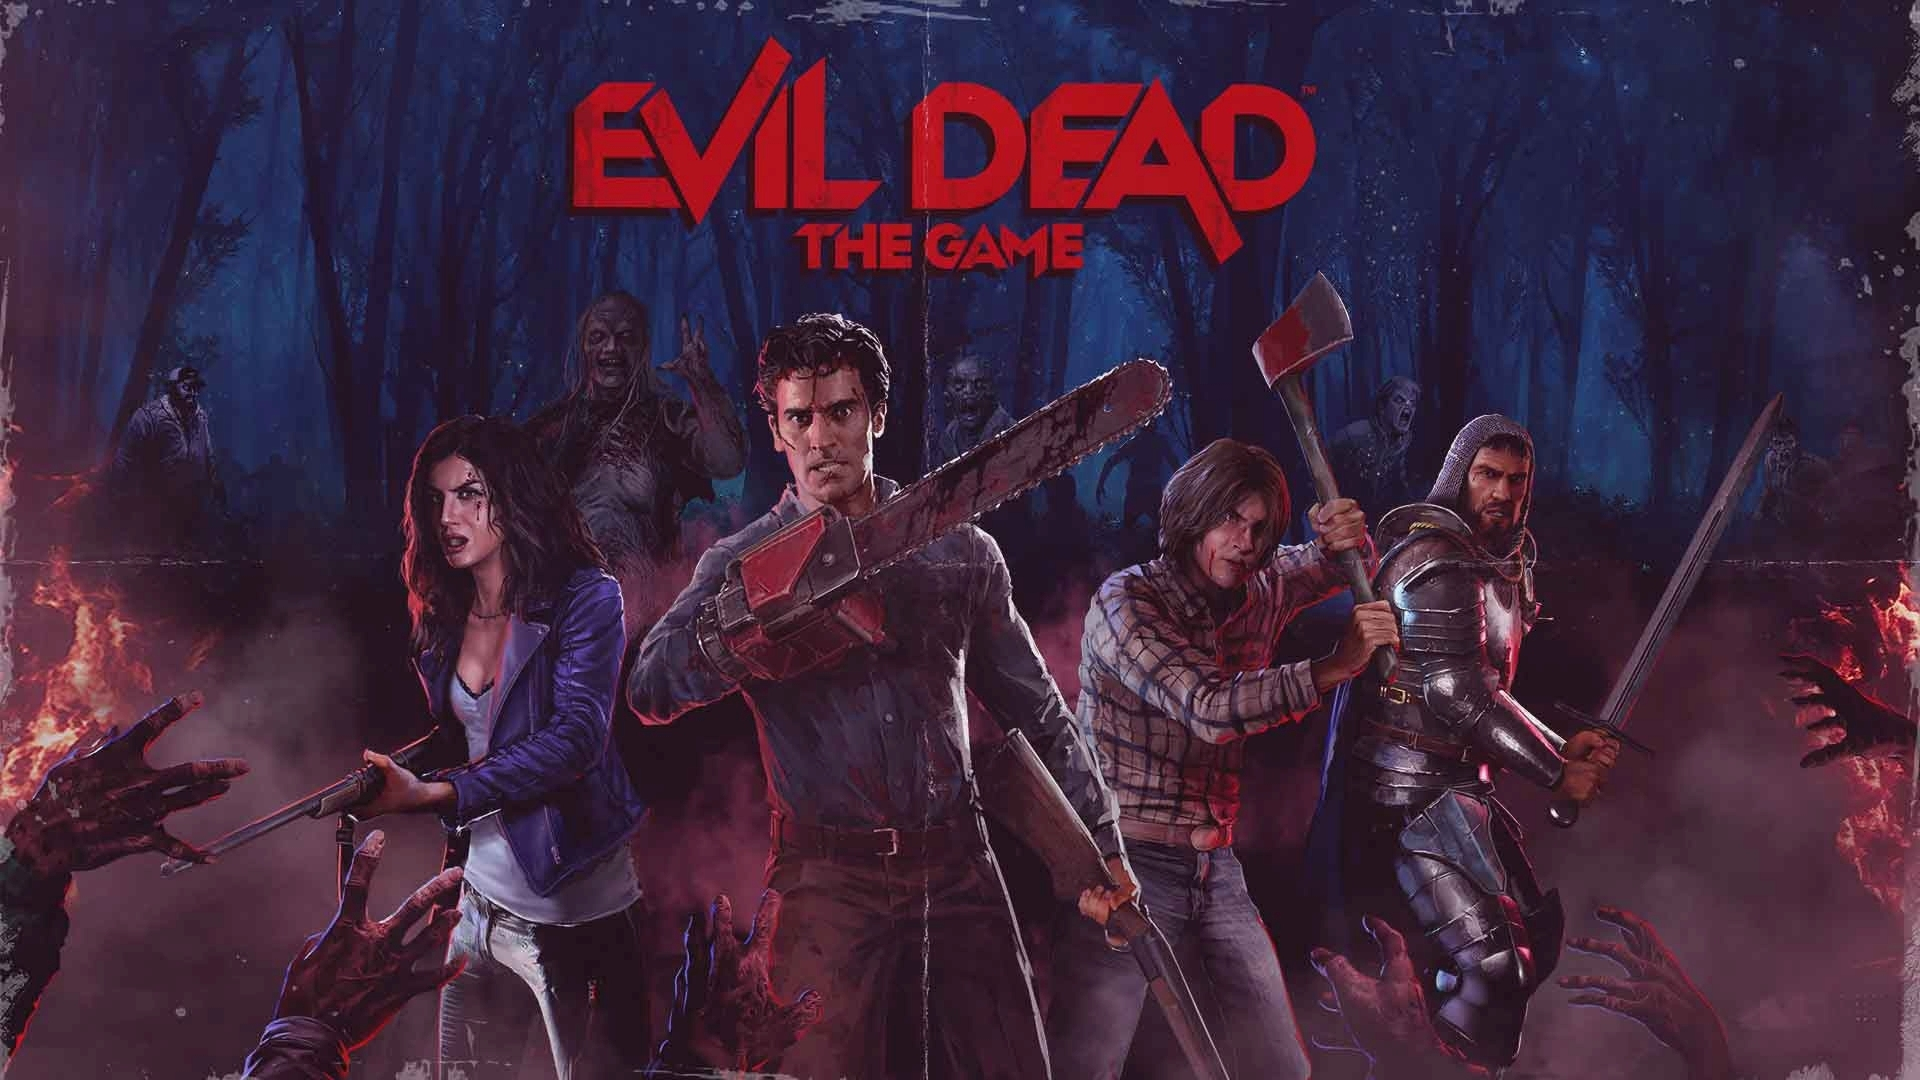   Evil Dead: The Game   ,      